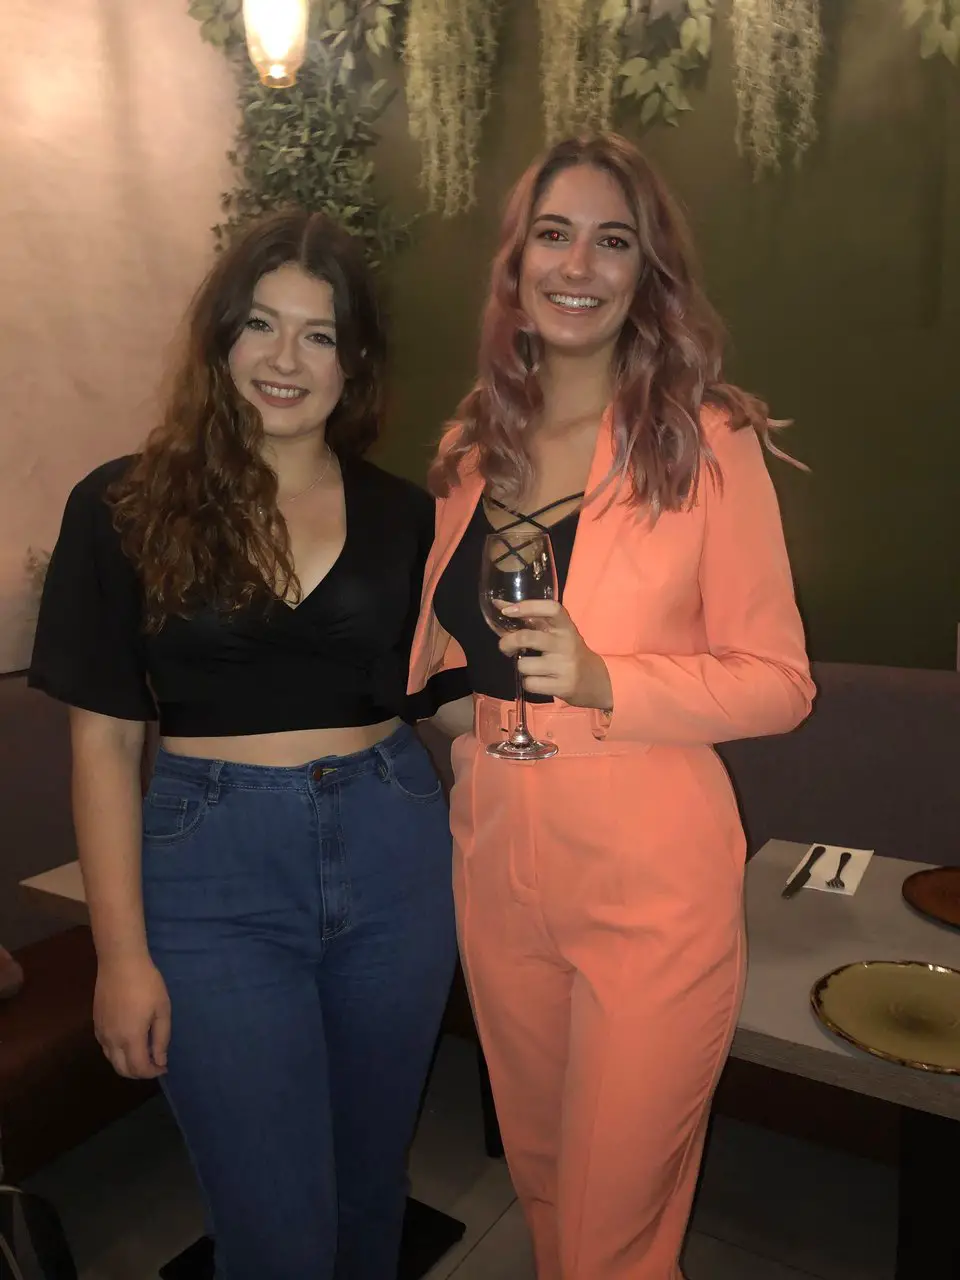 Ella and her friend Maddie enjoying drinks together in London